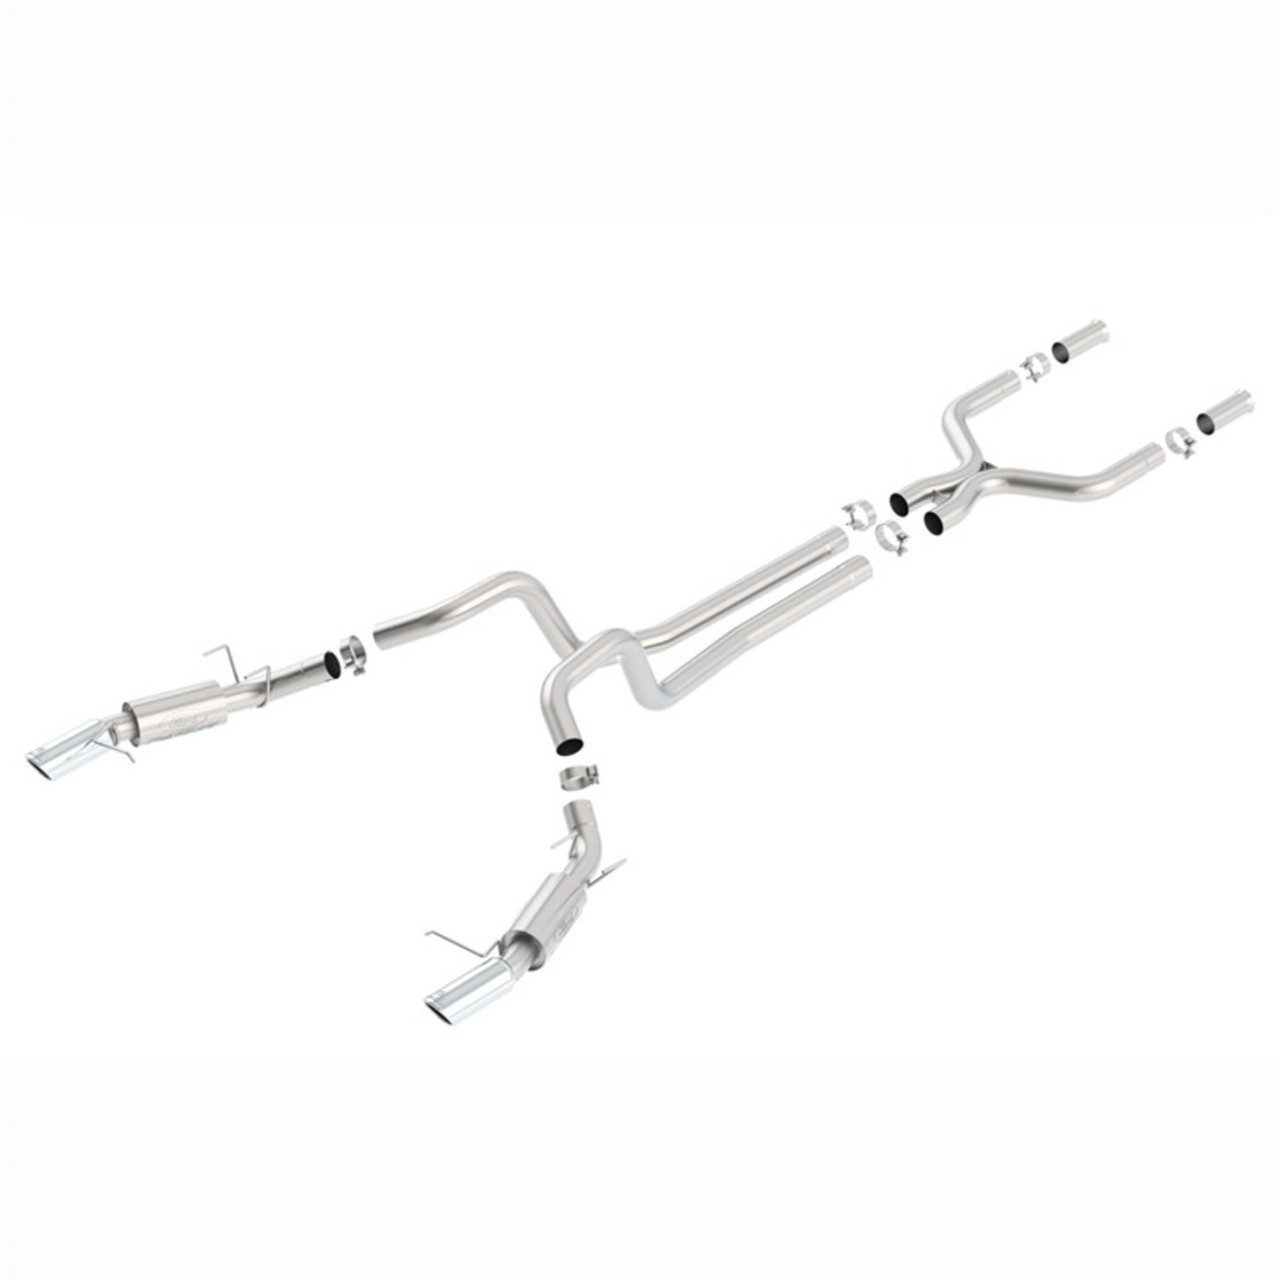 Ford Racing 2011-14 Mustang GT & 2011-12 GT500 3-inch Exhaust System - M- 5230-MGTCA30 - Carroll Shelby Racing